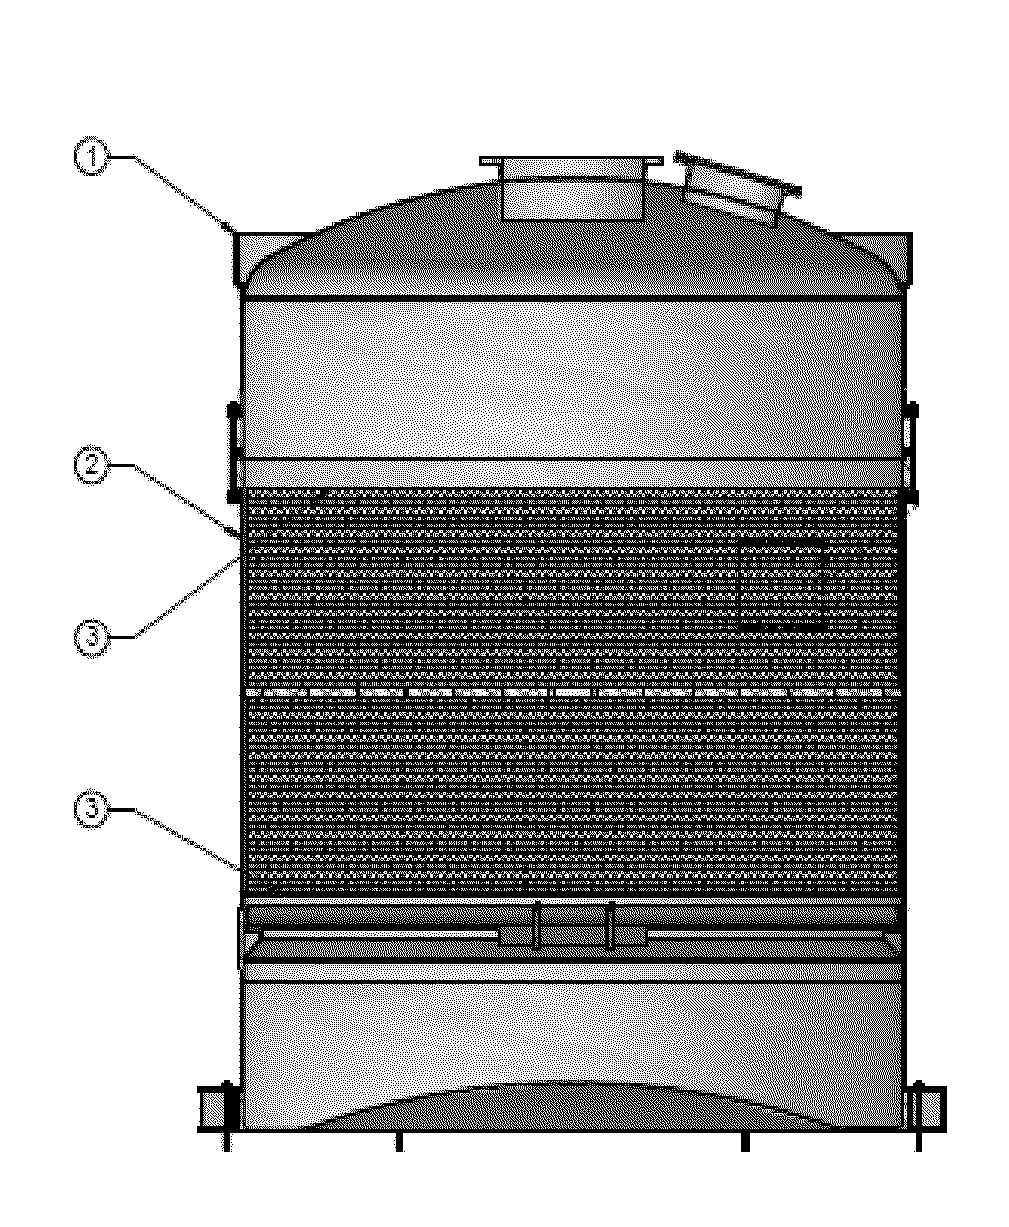 Device for purifying gases, such as air in particular, or liquids, such as water in particular